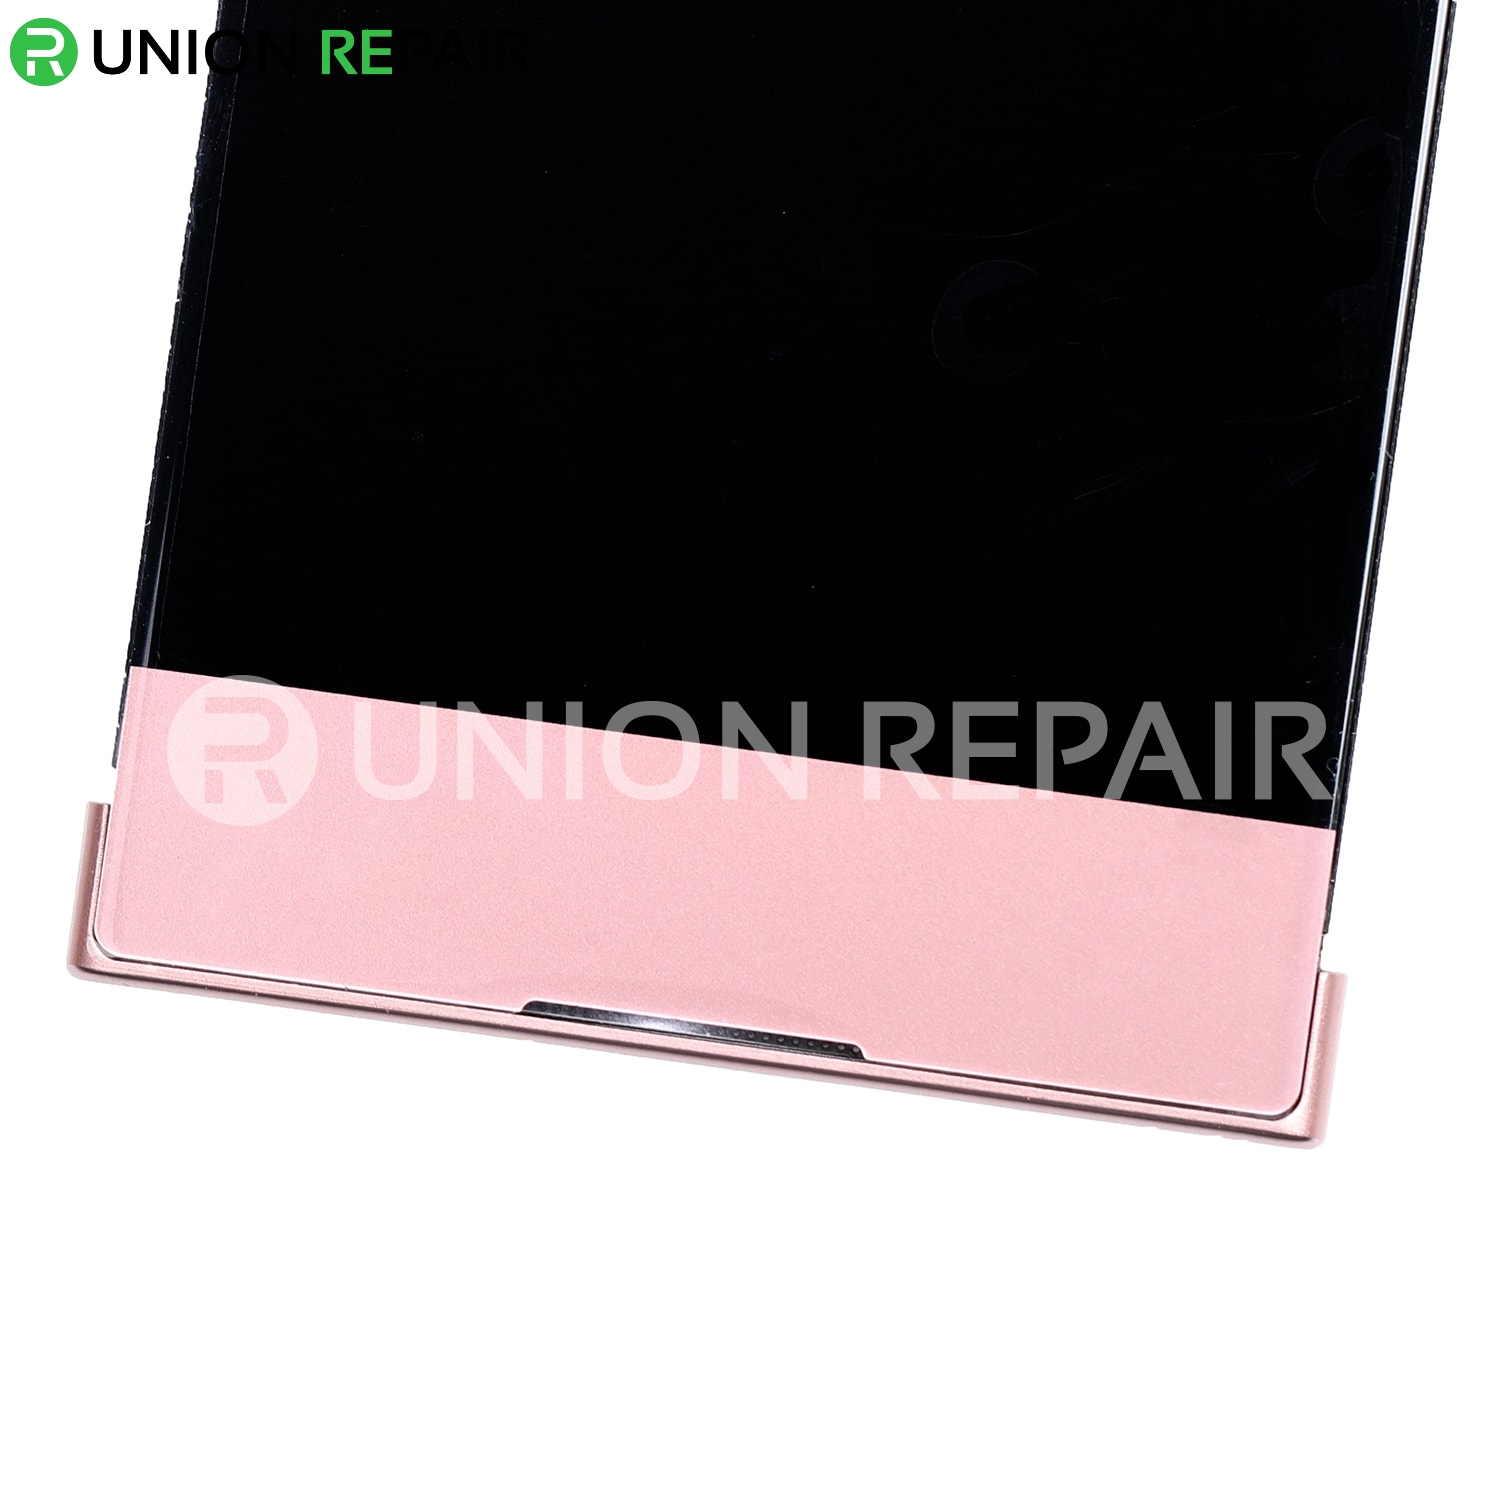 Replacement for Sony Xperia XA1 LCD Screen Digitizer Assembly with Frame - Pink